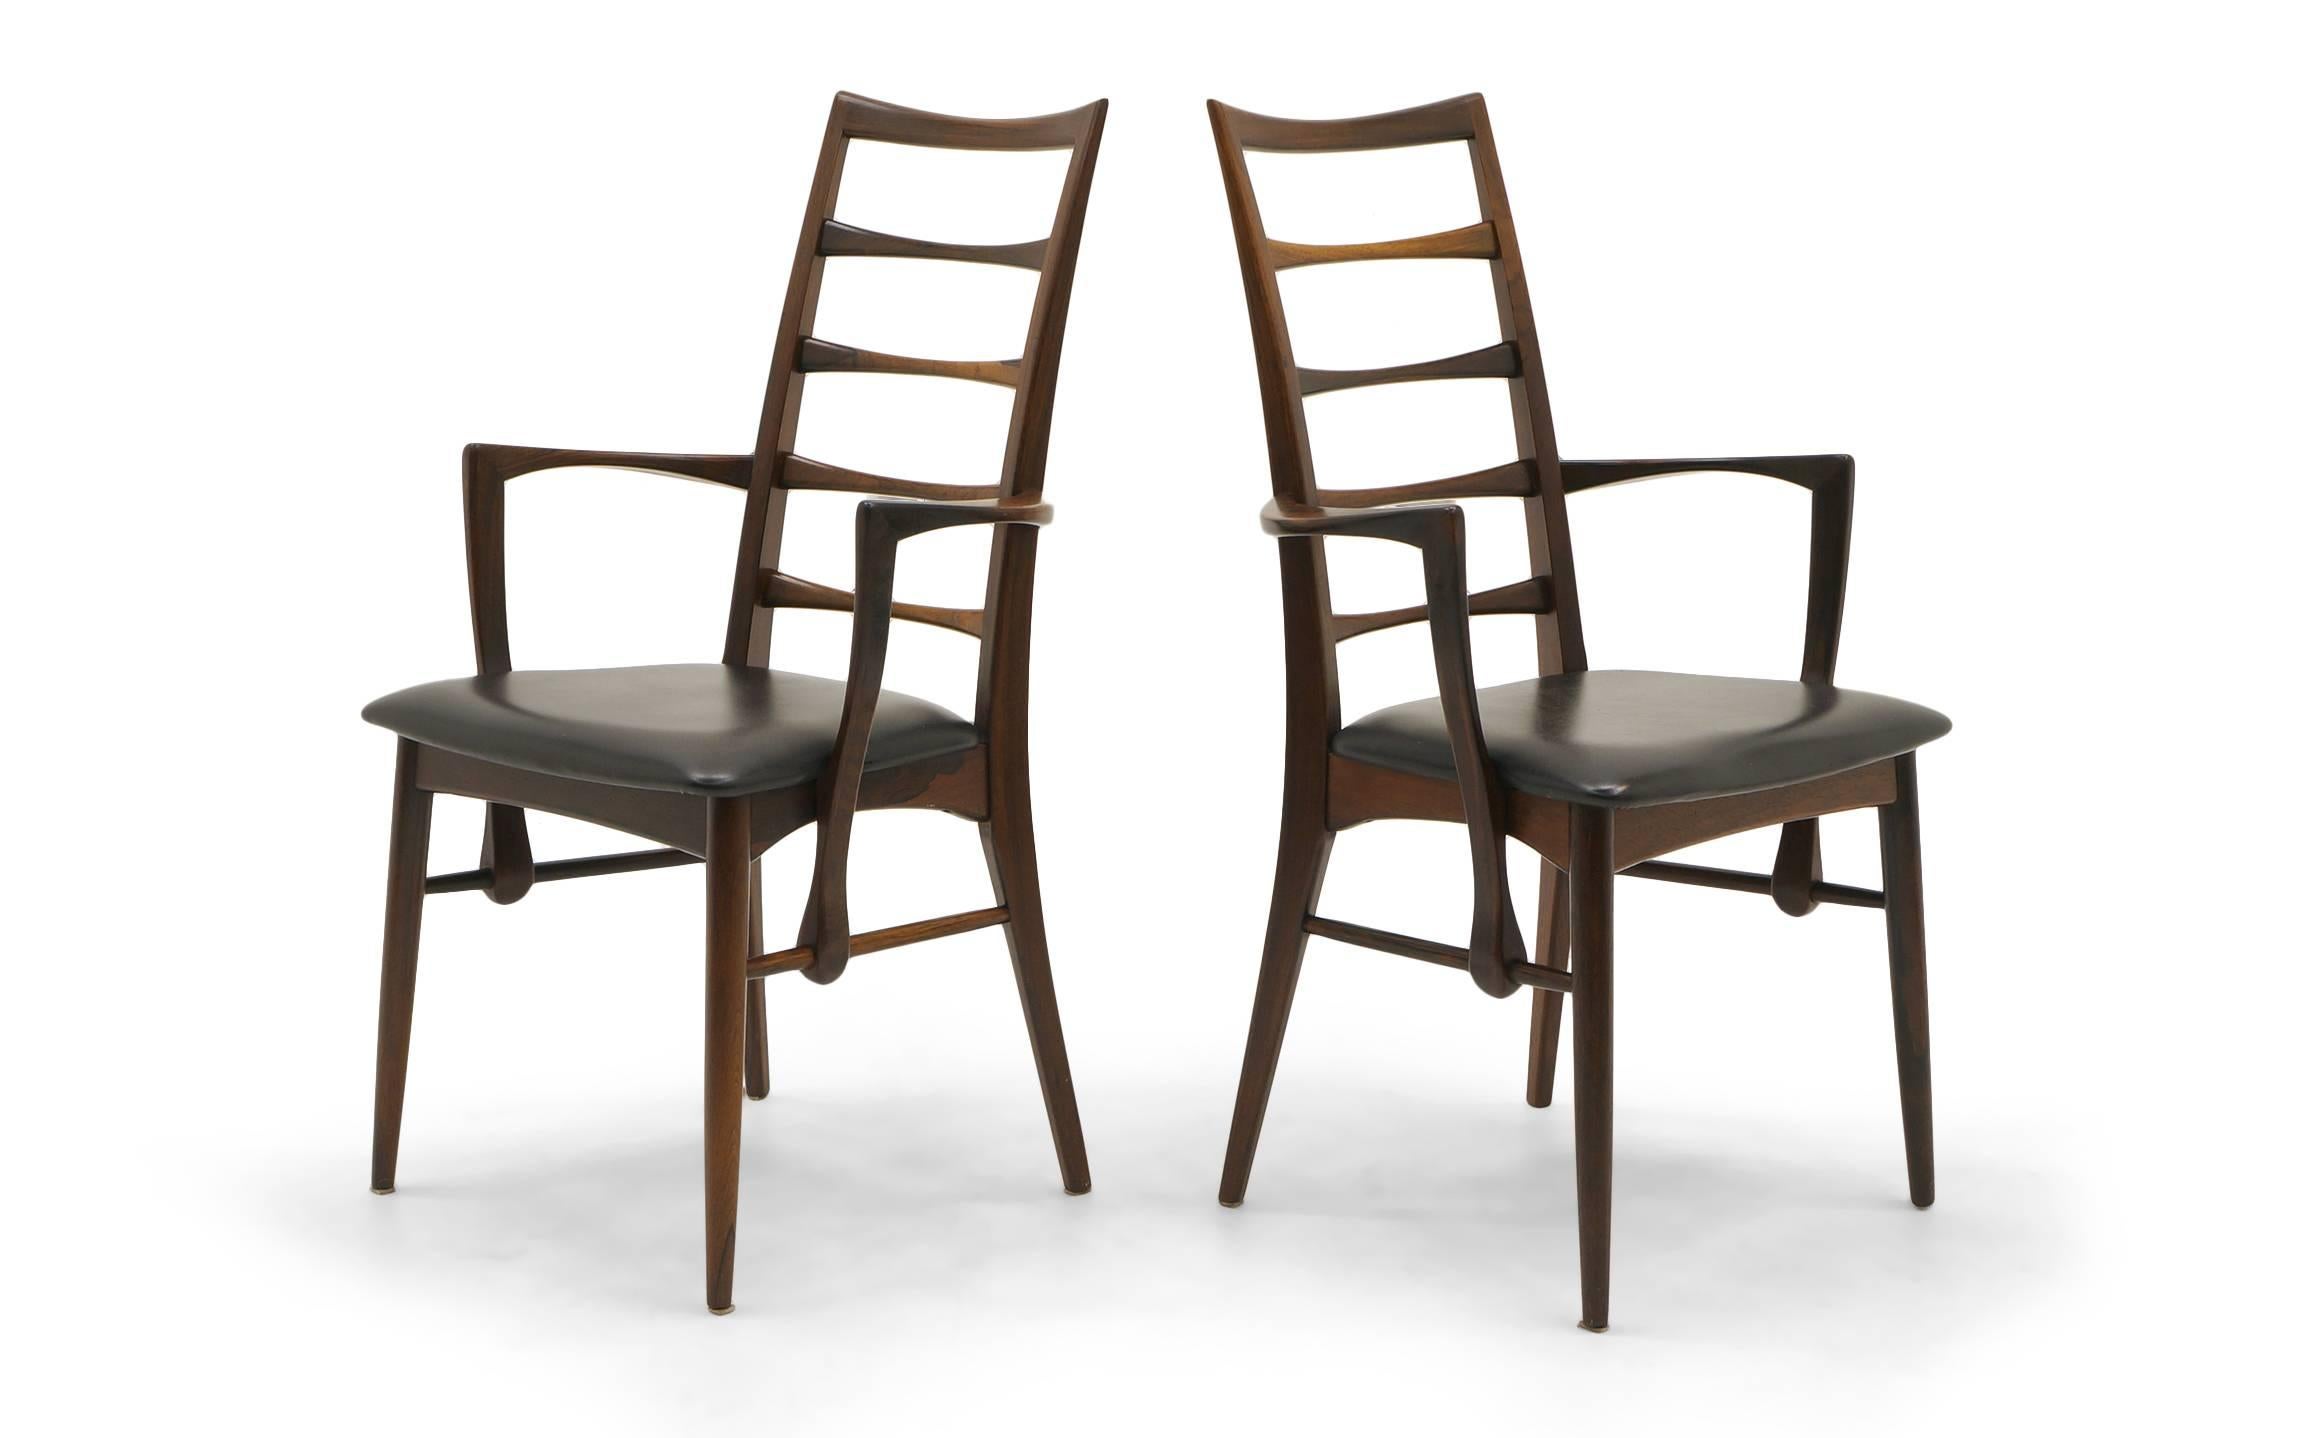 Scandinavian Modern 6 Rosewood Lis Dining Chairs by Niels Kofoed, Two with arms, Four armless